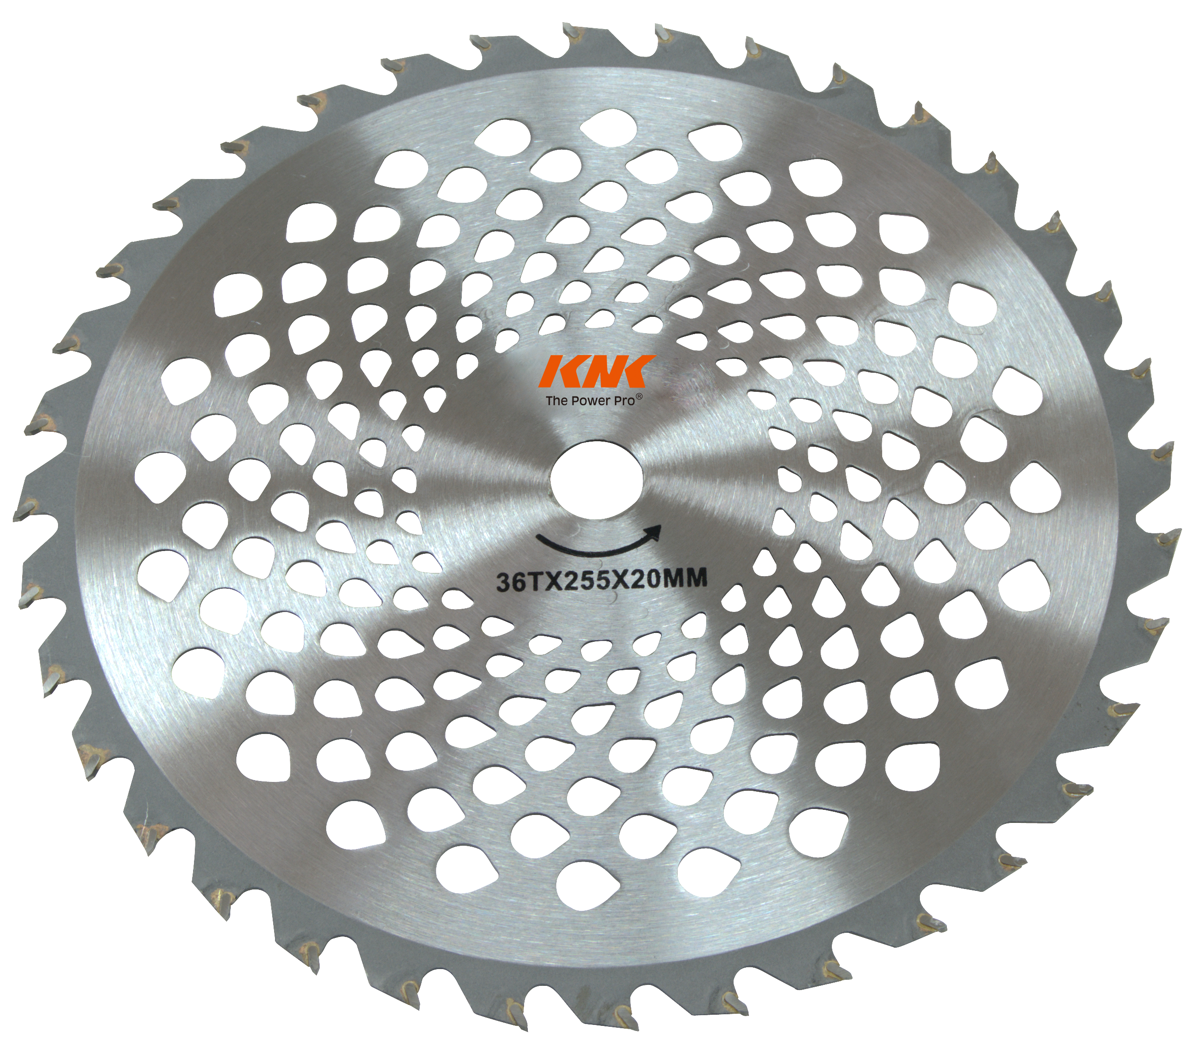 KNKPOWER PRODUCT IMAGE 28680